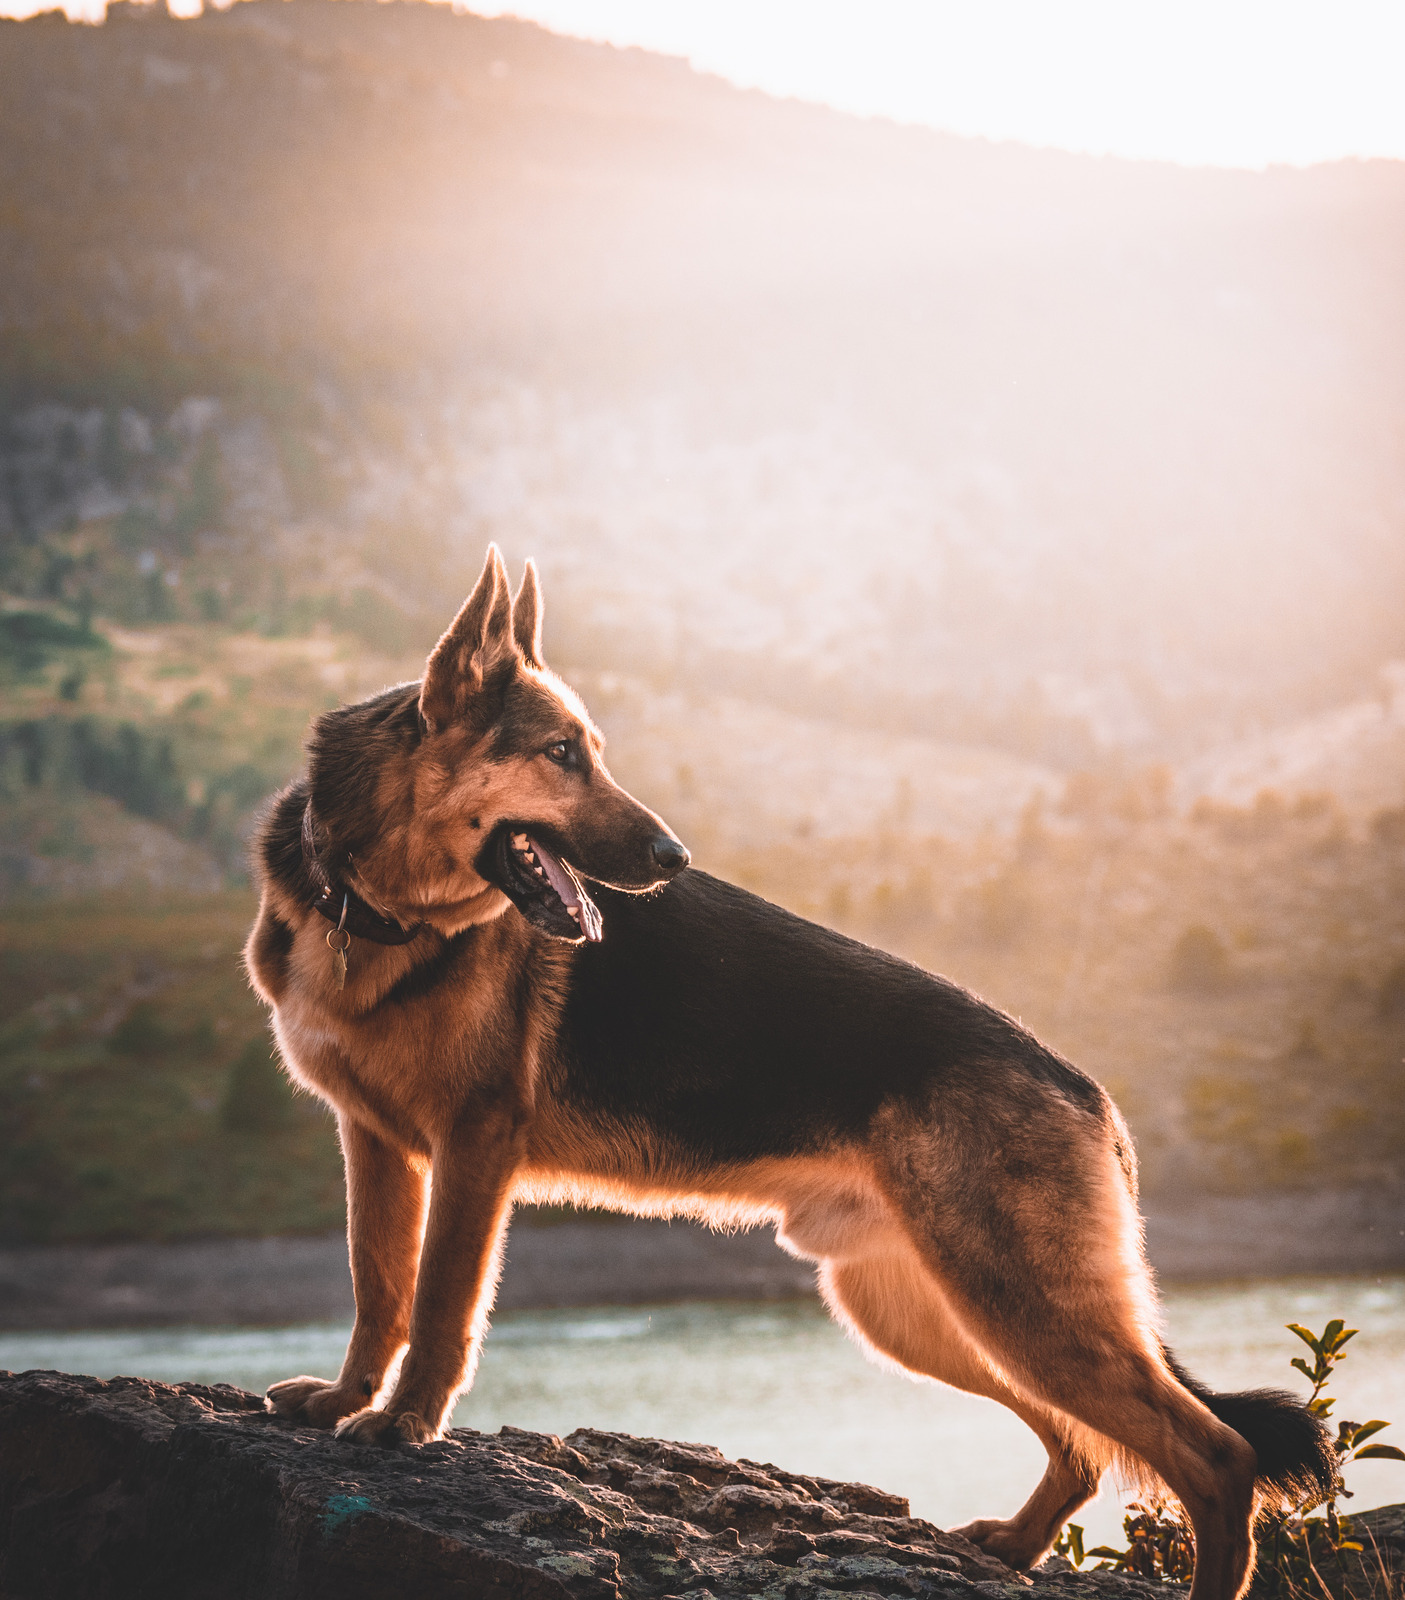 GSDs are the most coveted, but this user wants something specific.